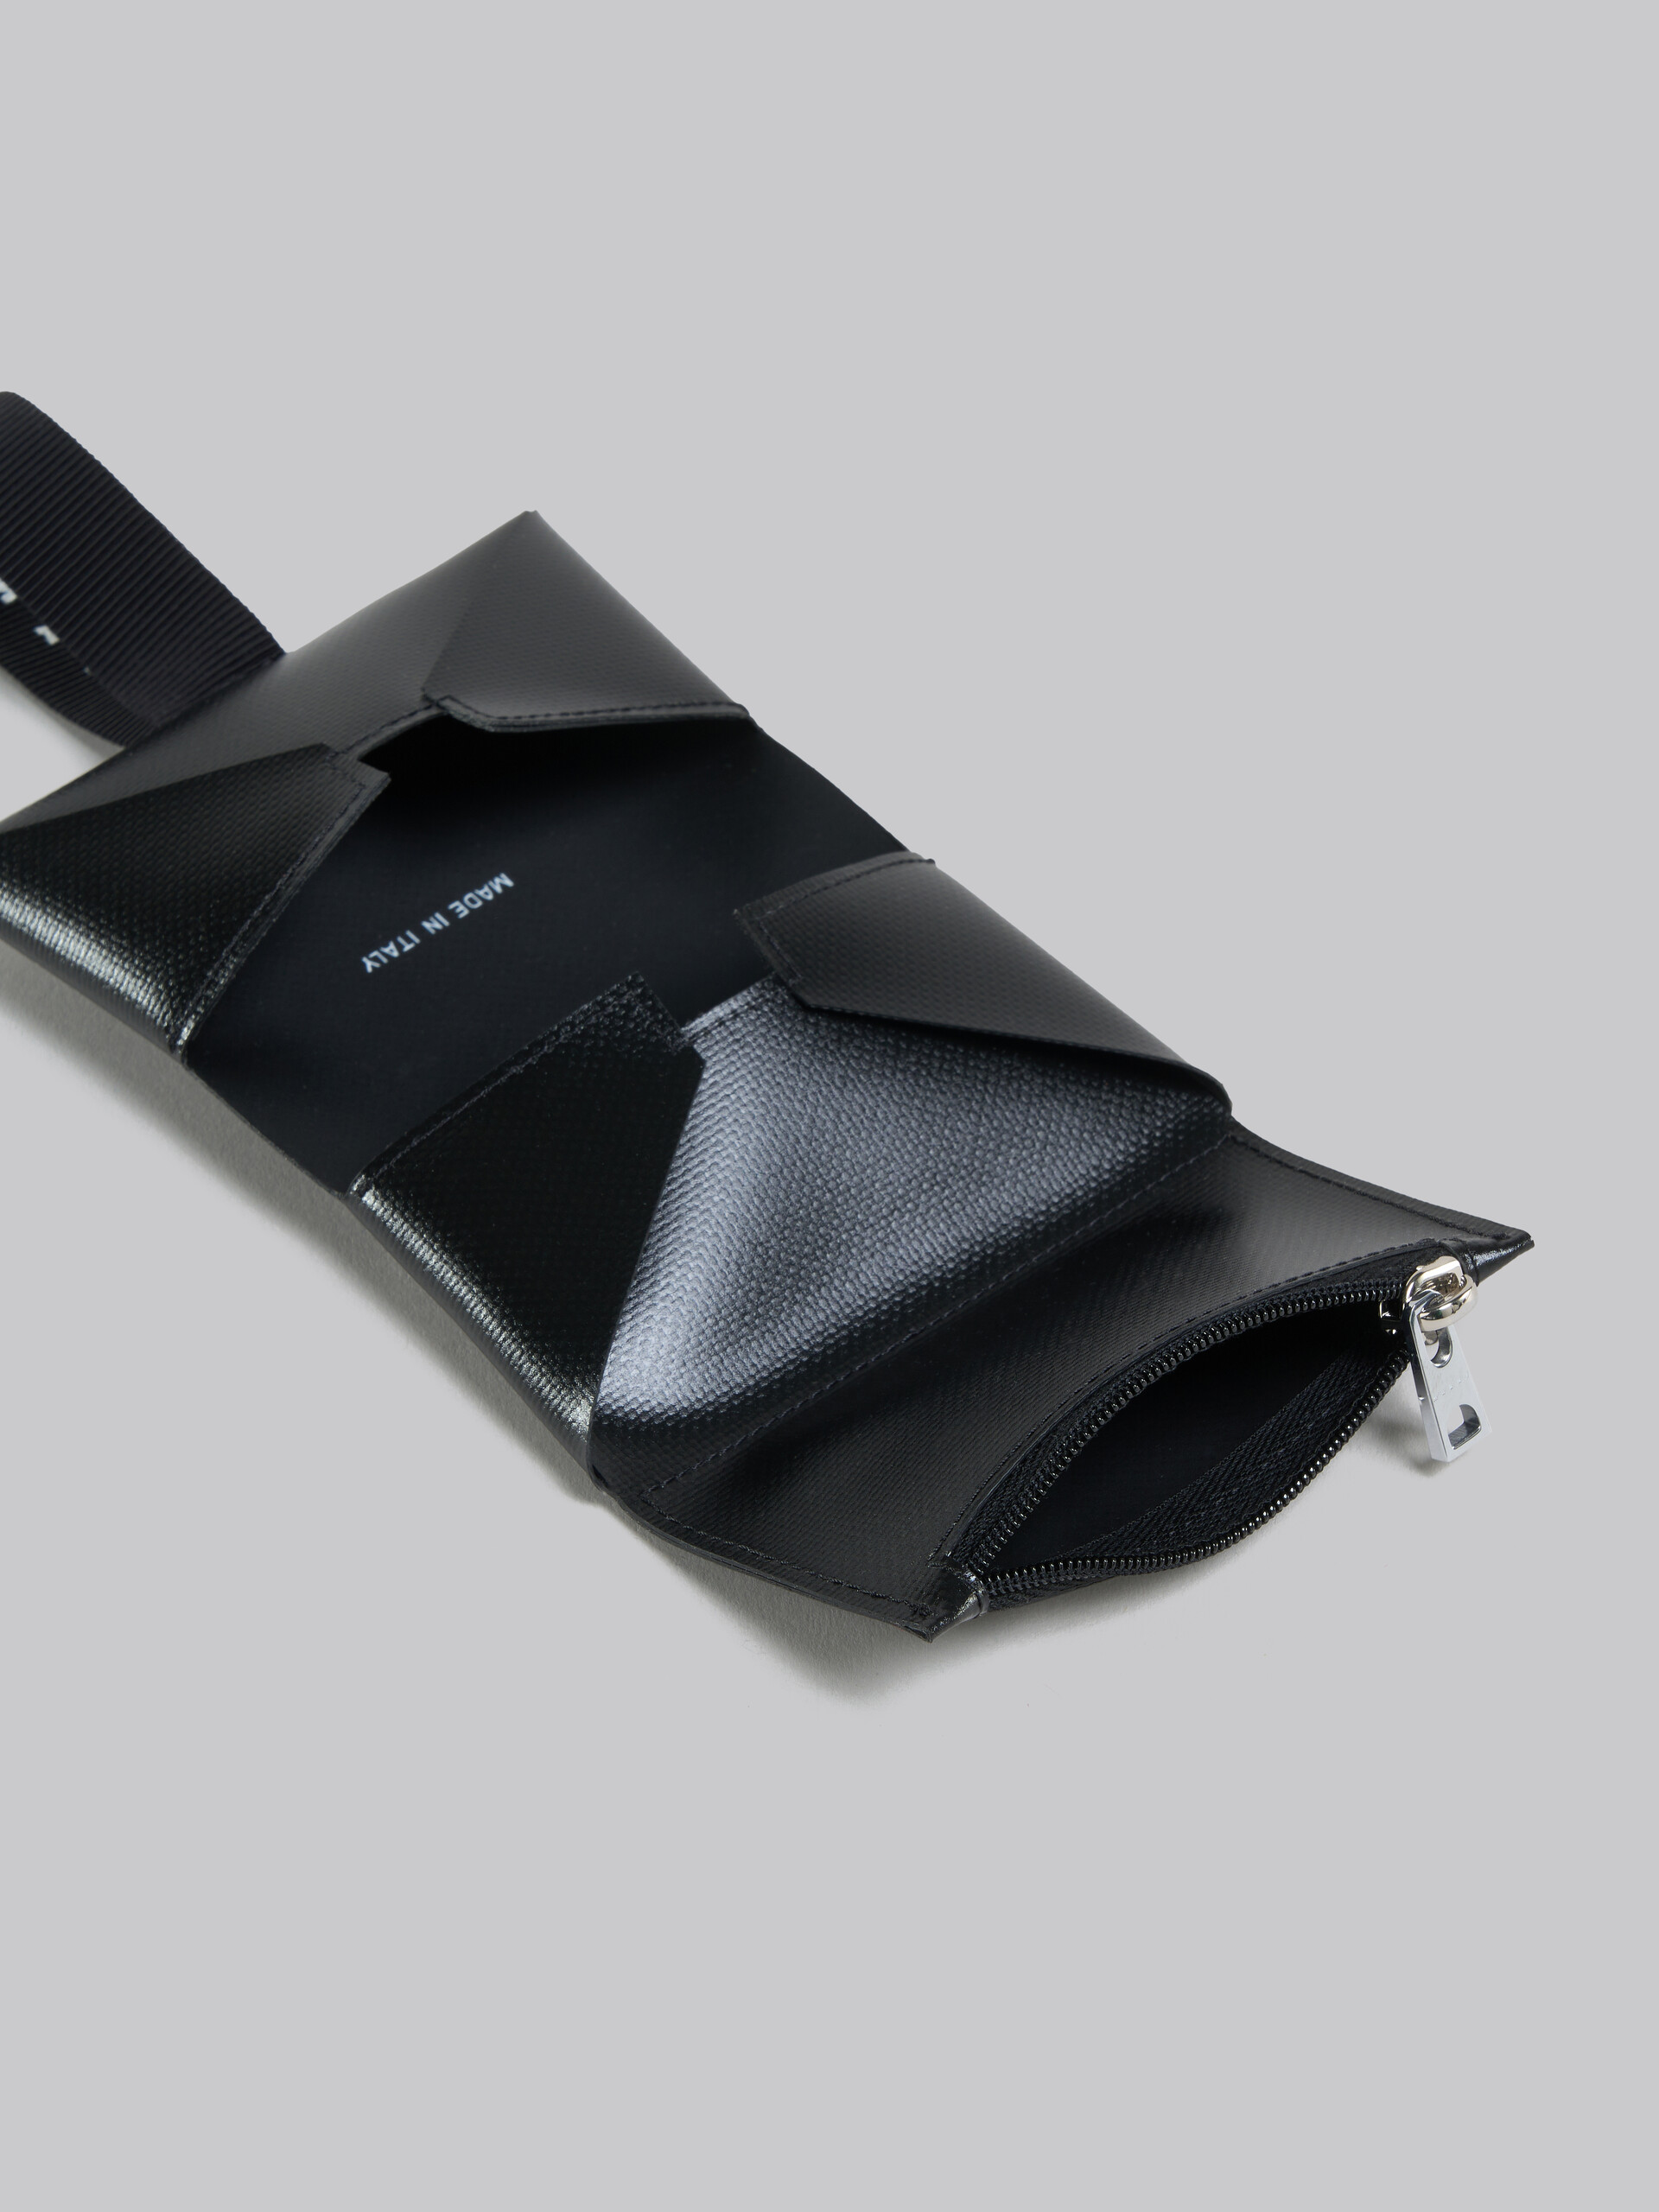 Black trifold wallet with logo strap - Wallets - Image 2